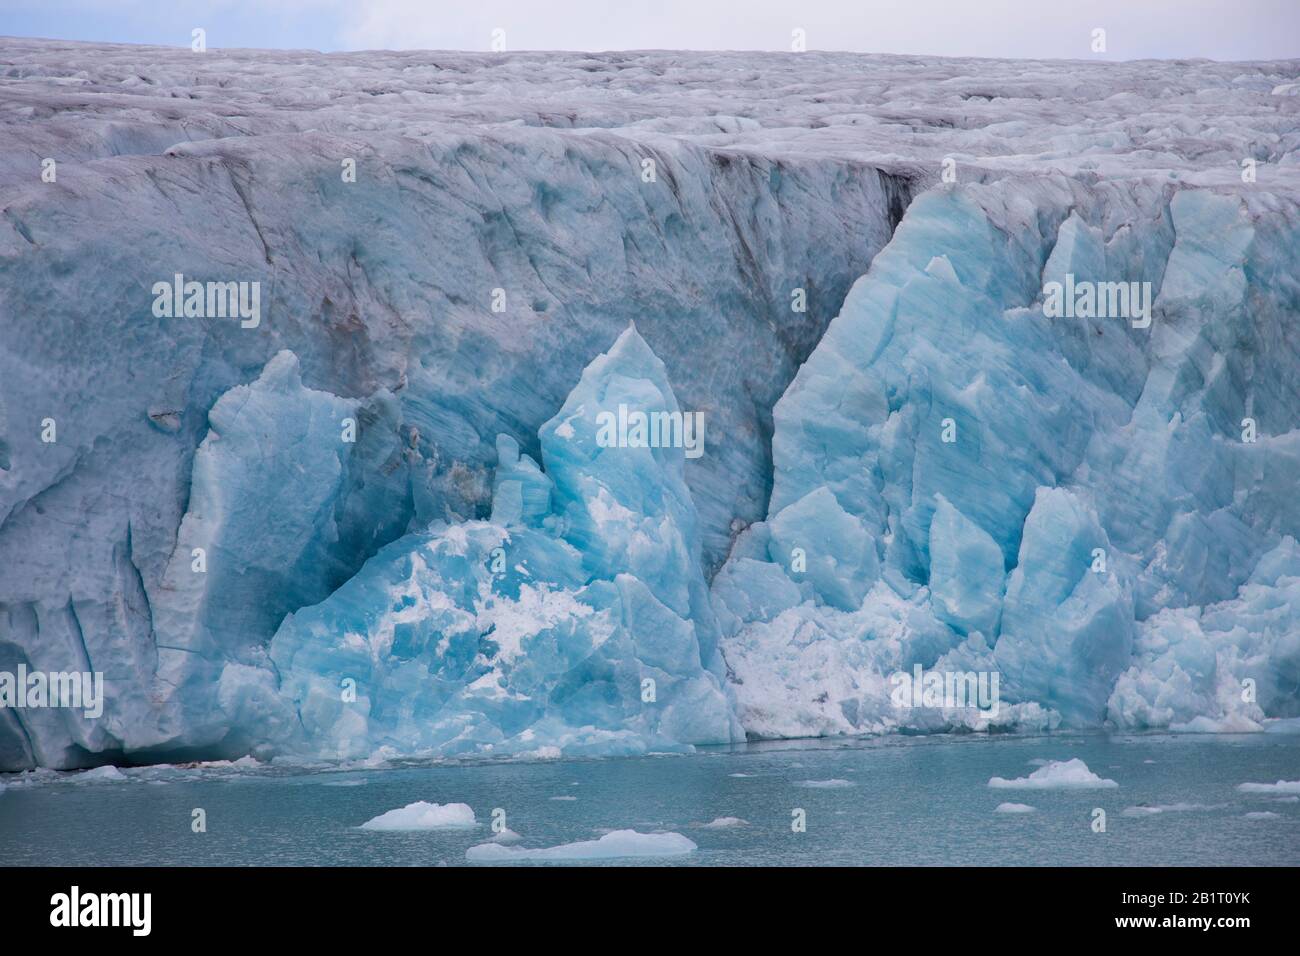 The glacier front on water. Melting and caving ice Stock Photo